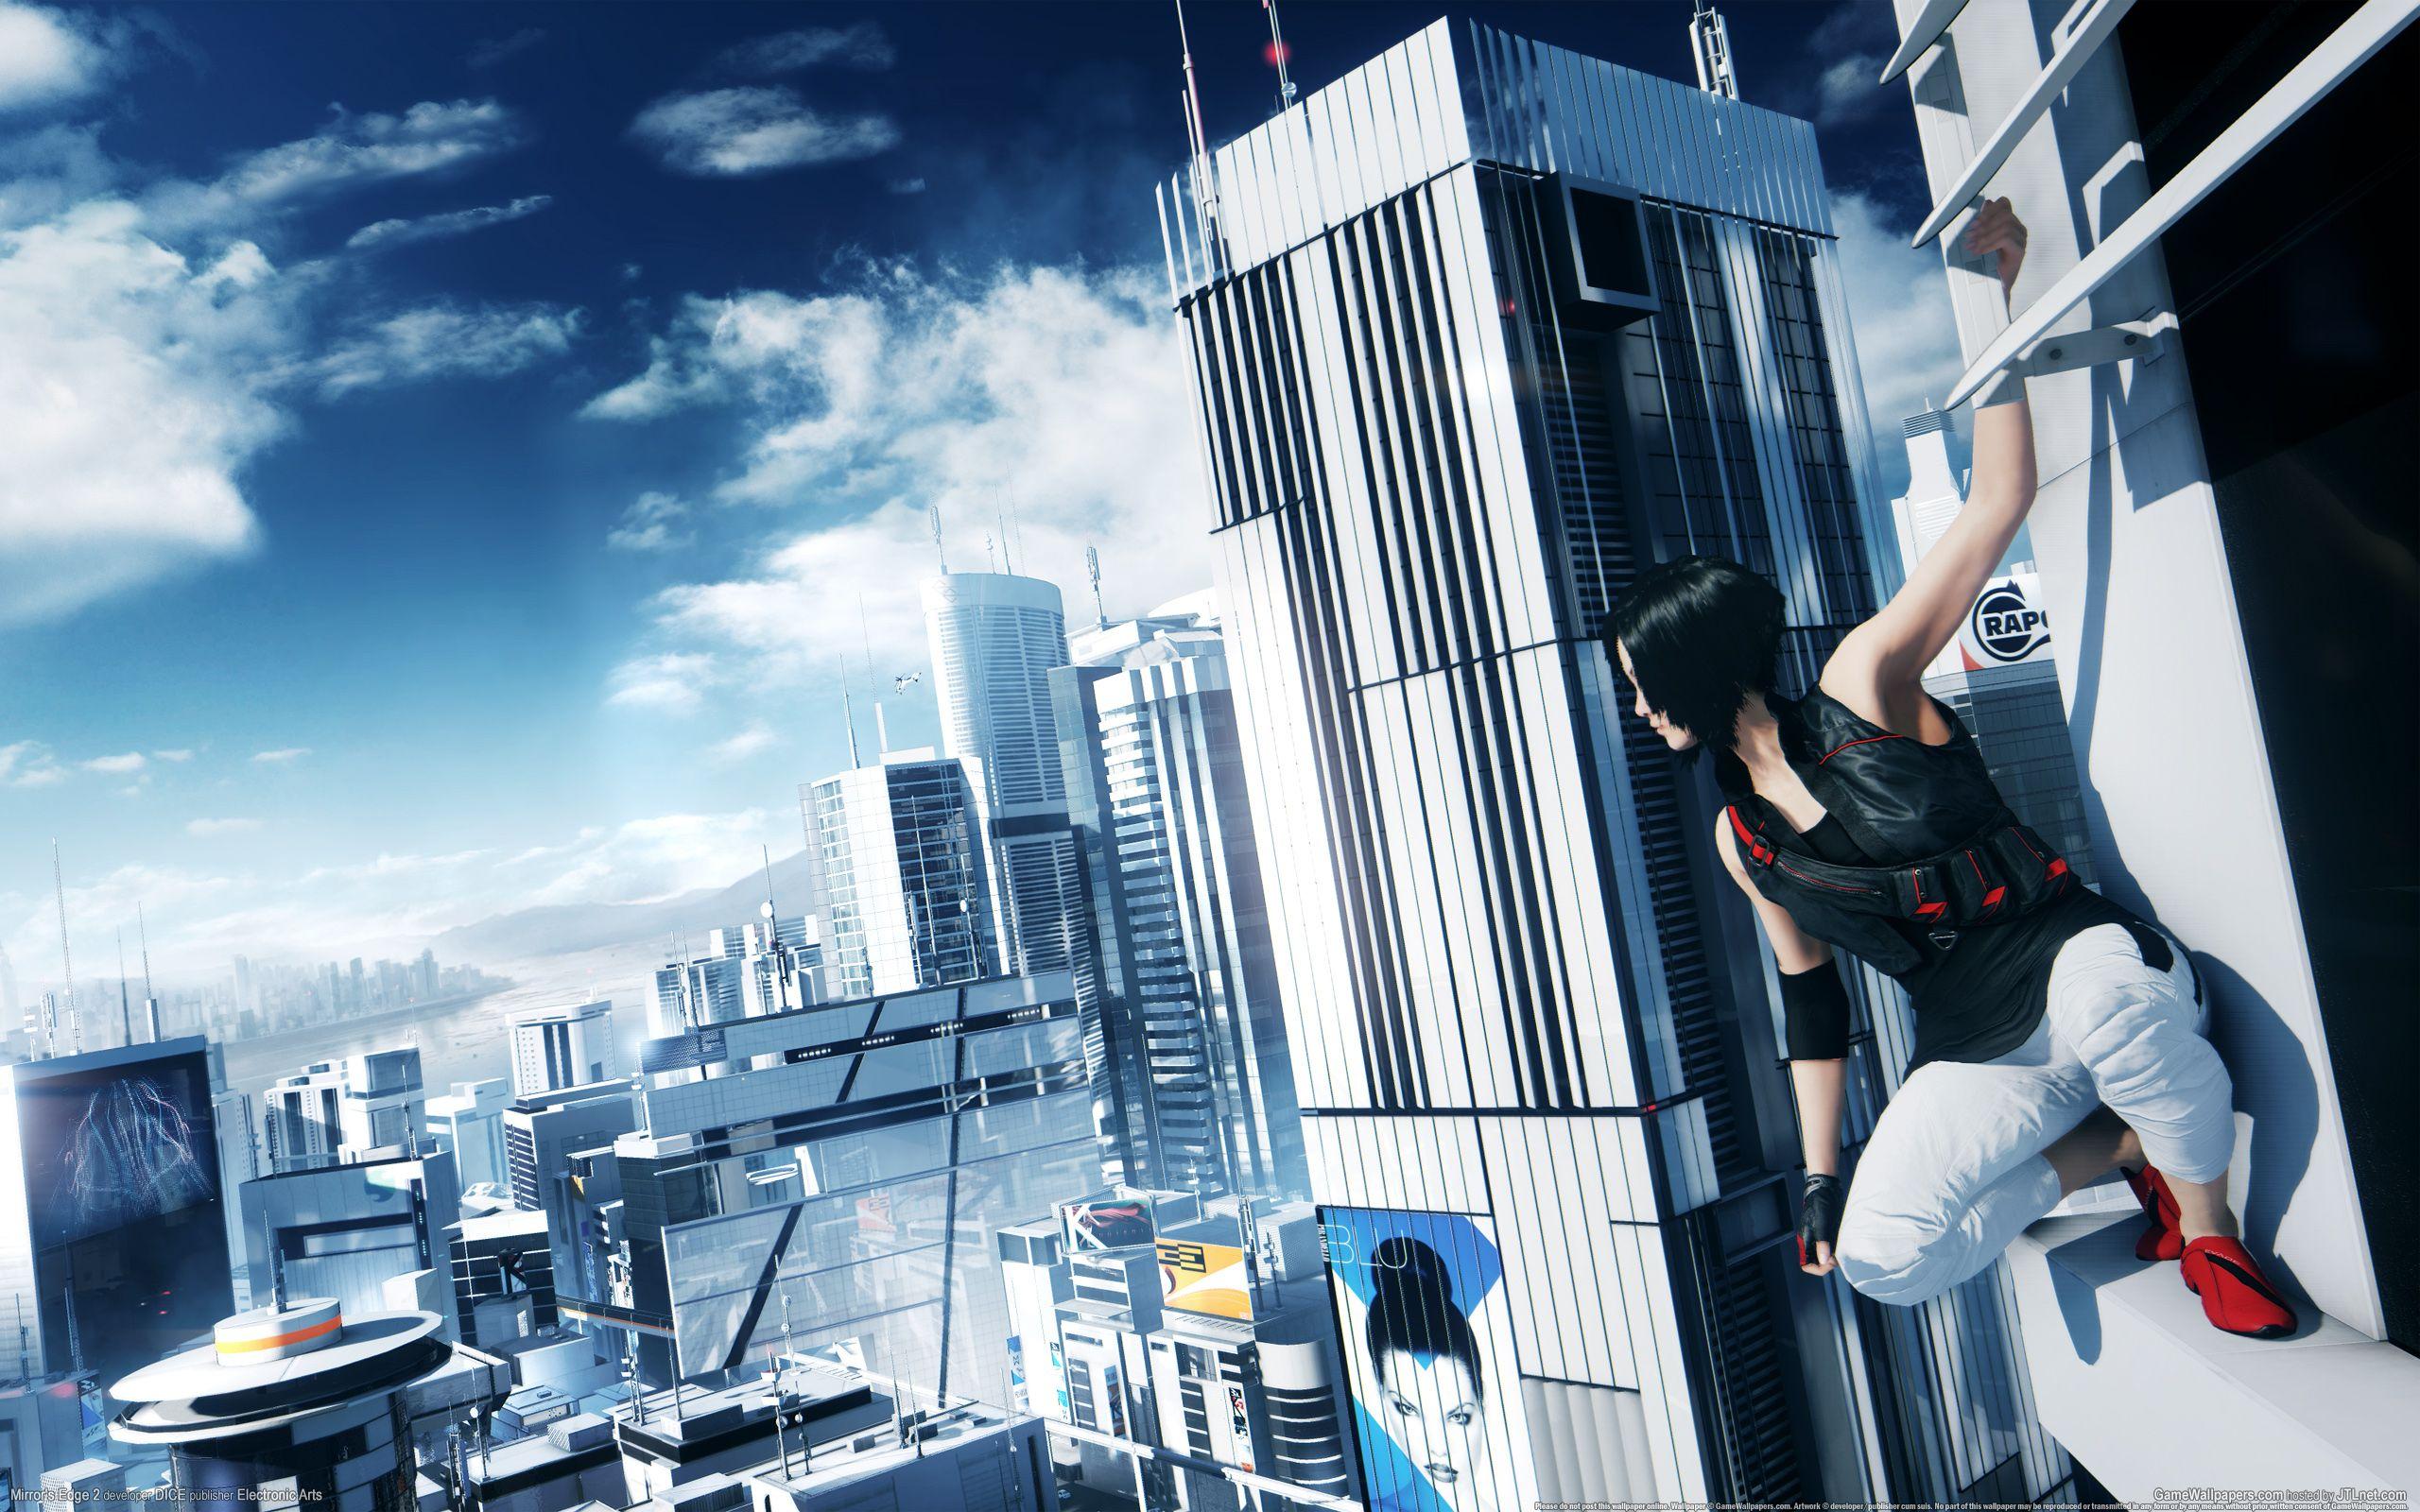 Free Running Expert Channels Mirror's Edge In POV Video